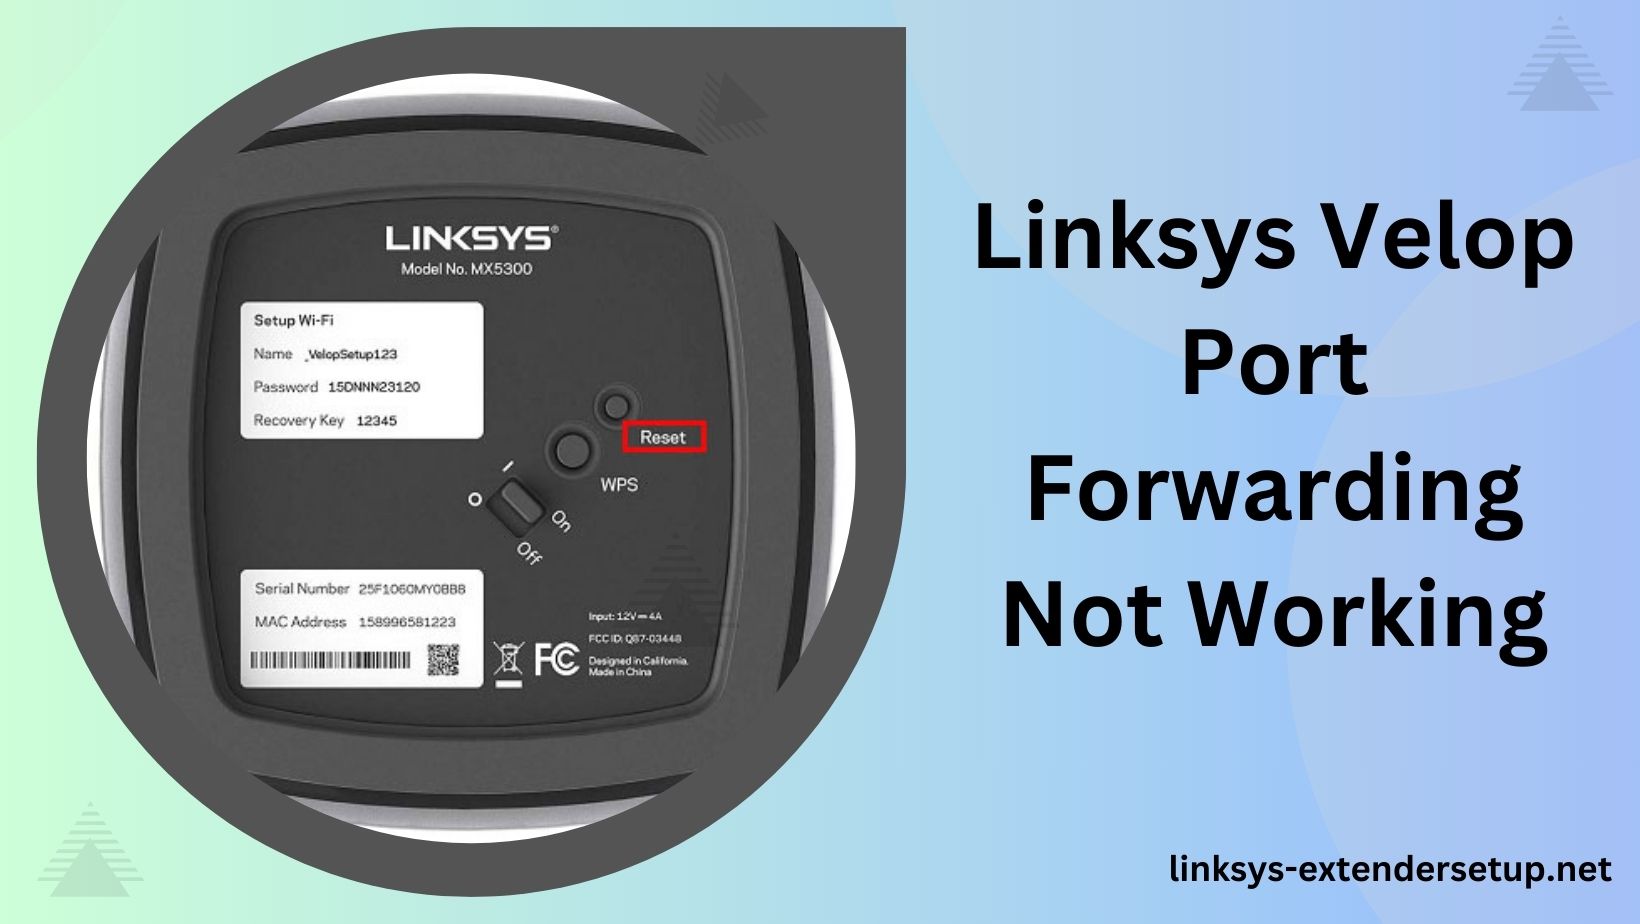 You are currently viewing Understanding and Troubleshooting Linksys Velop Port Forwarding Issues